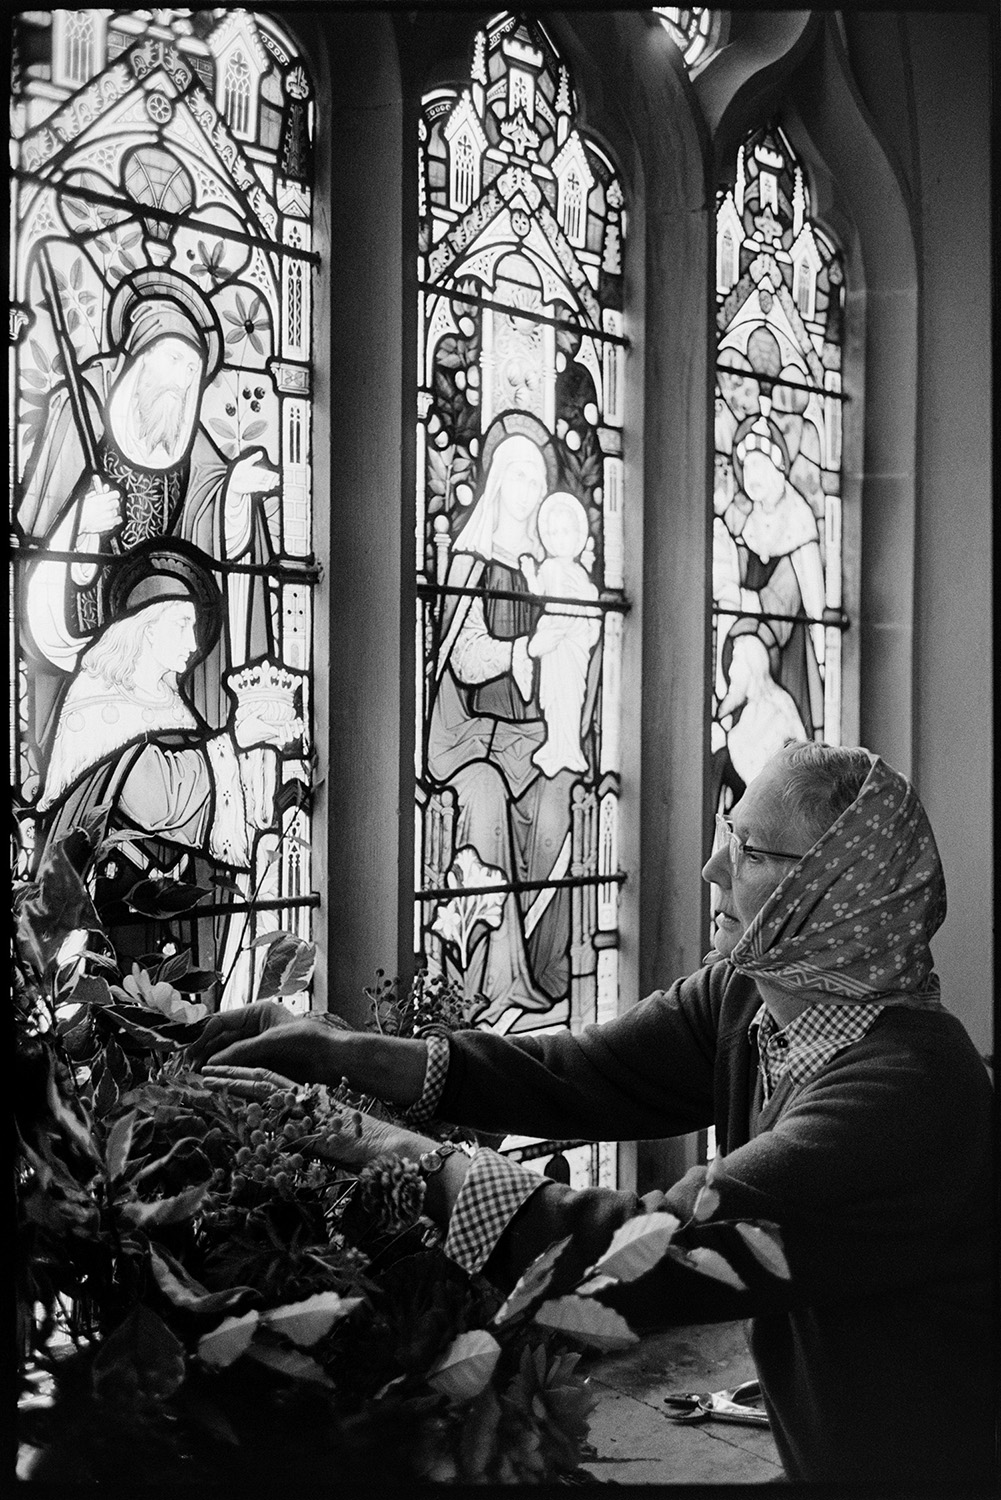 People decorating church for Harvest Festival.
[A woman placing flowers in an arrangement on the windowsill of a stained glass window for the Harvest Festival at Dolton Church. She is wearing a headscarf]